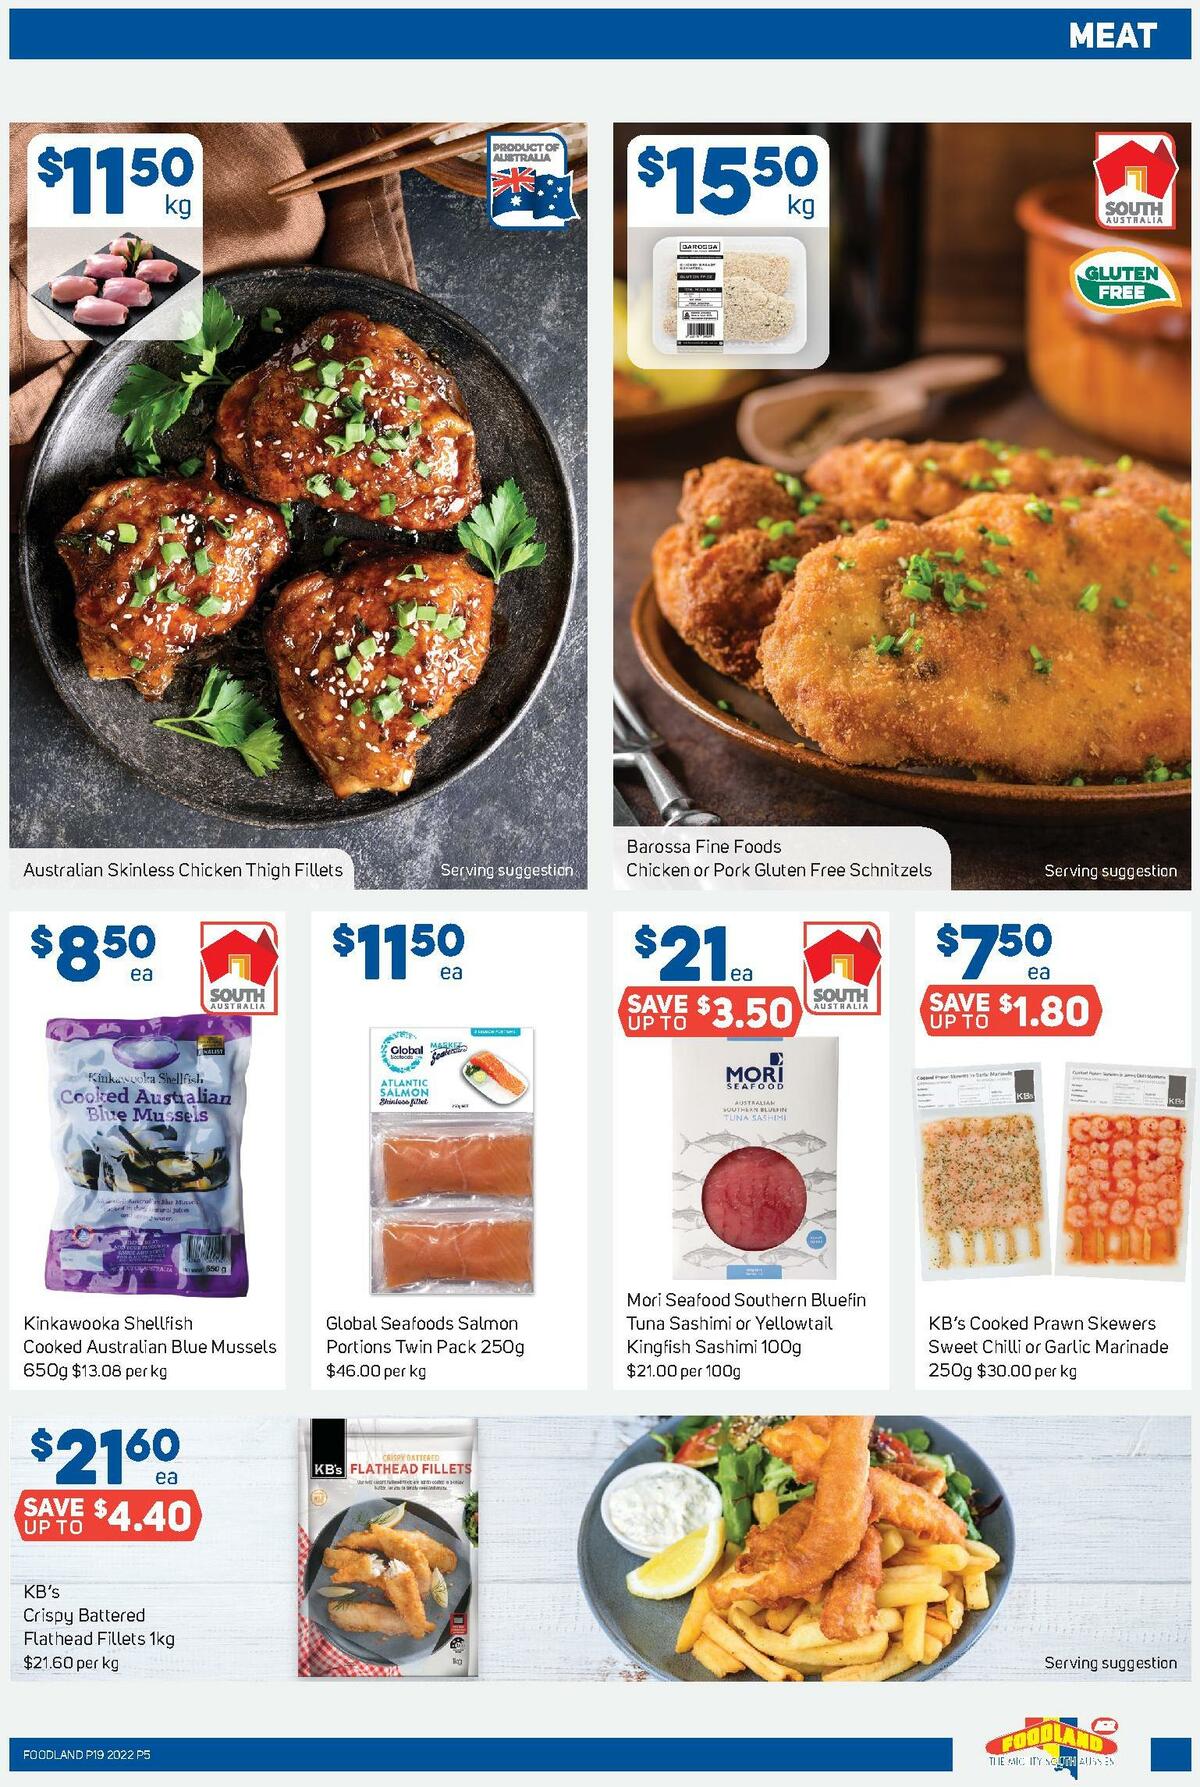 Foodland Catalogues from 11 May